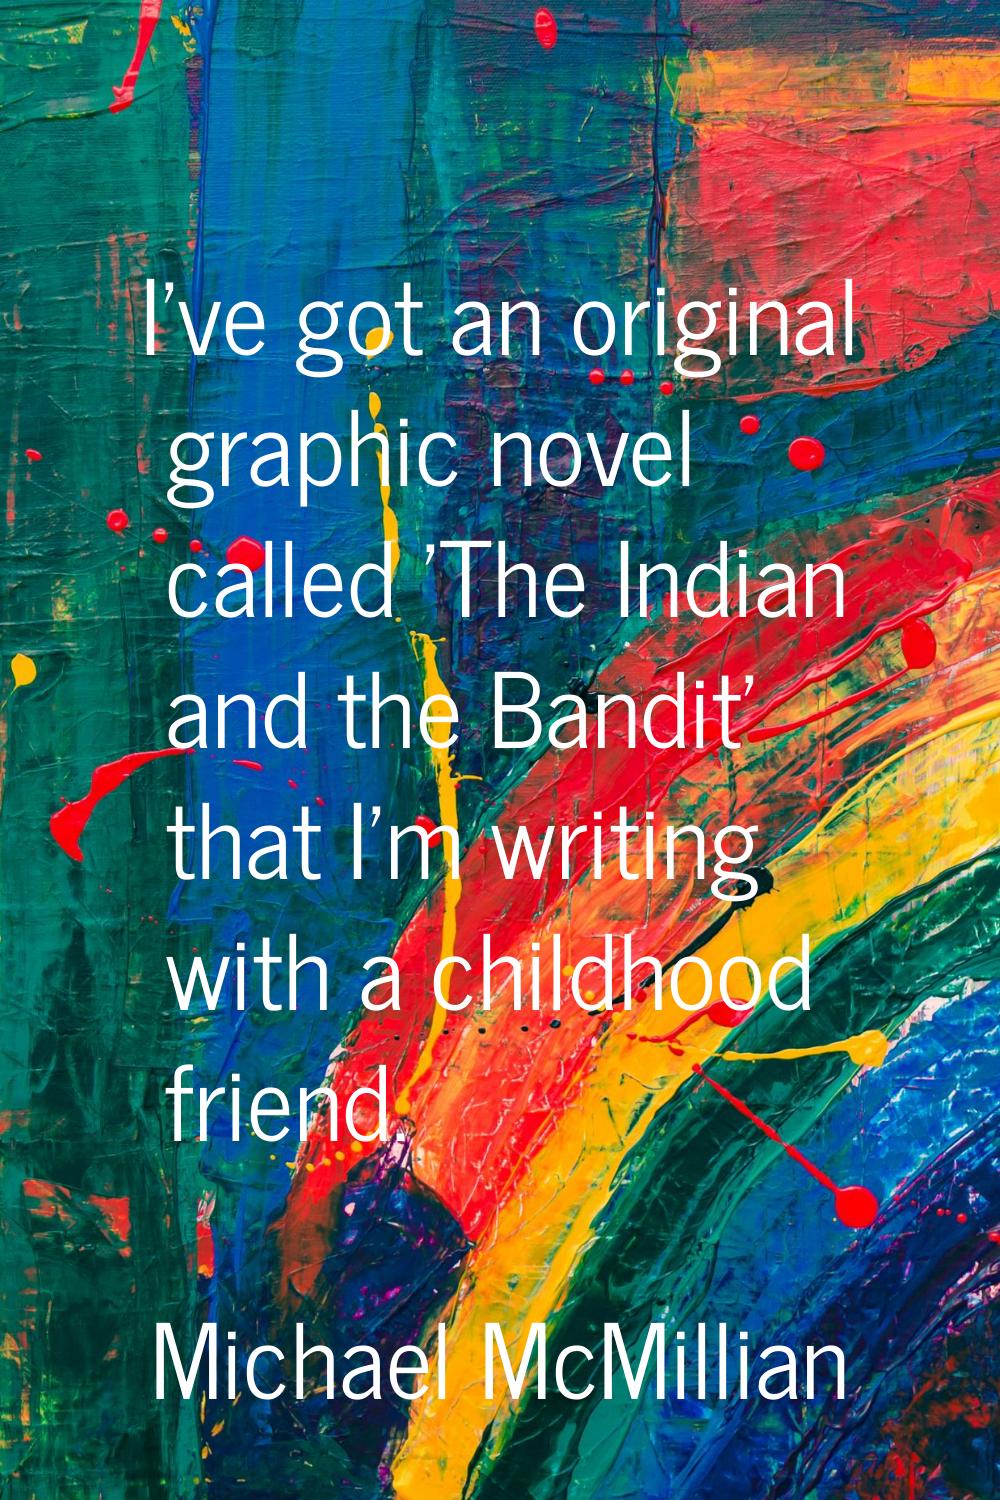 I've got an original graphic novel called 'The Indian and the Bandit' that I'm writing with a child